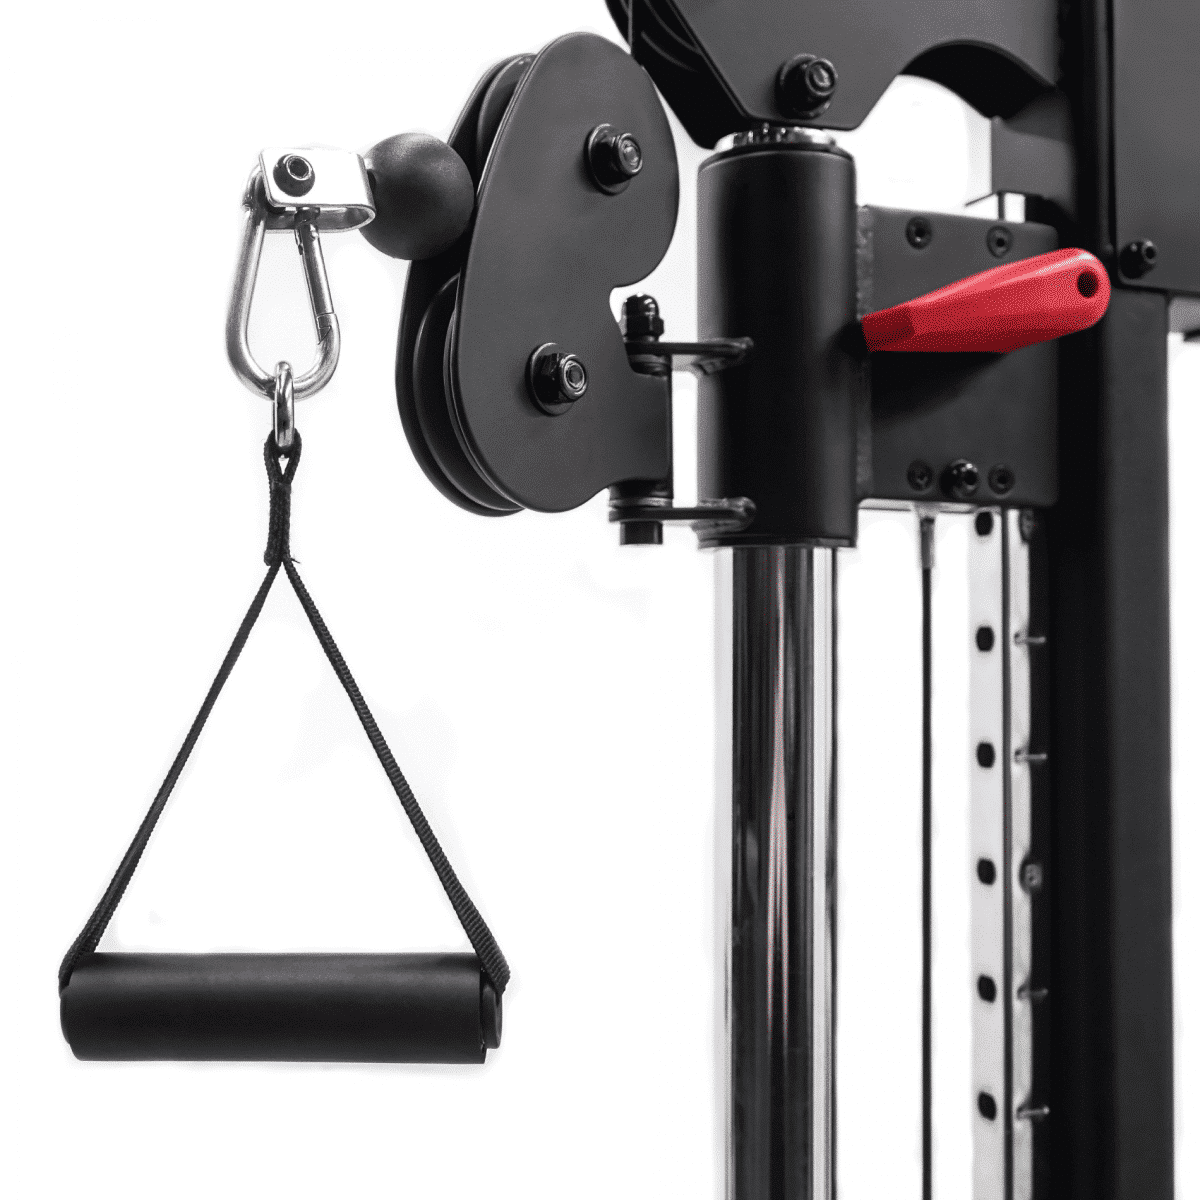 A gym machine with a pulley attached to it.